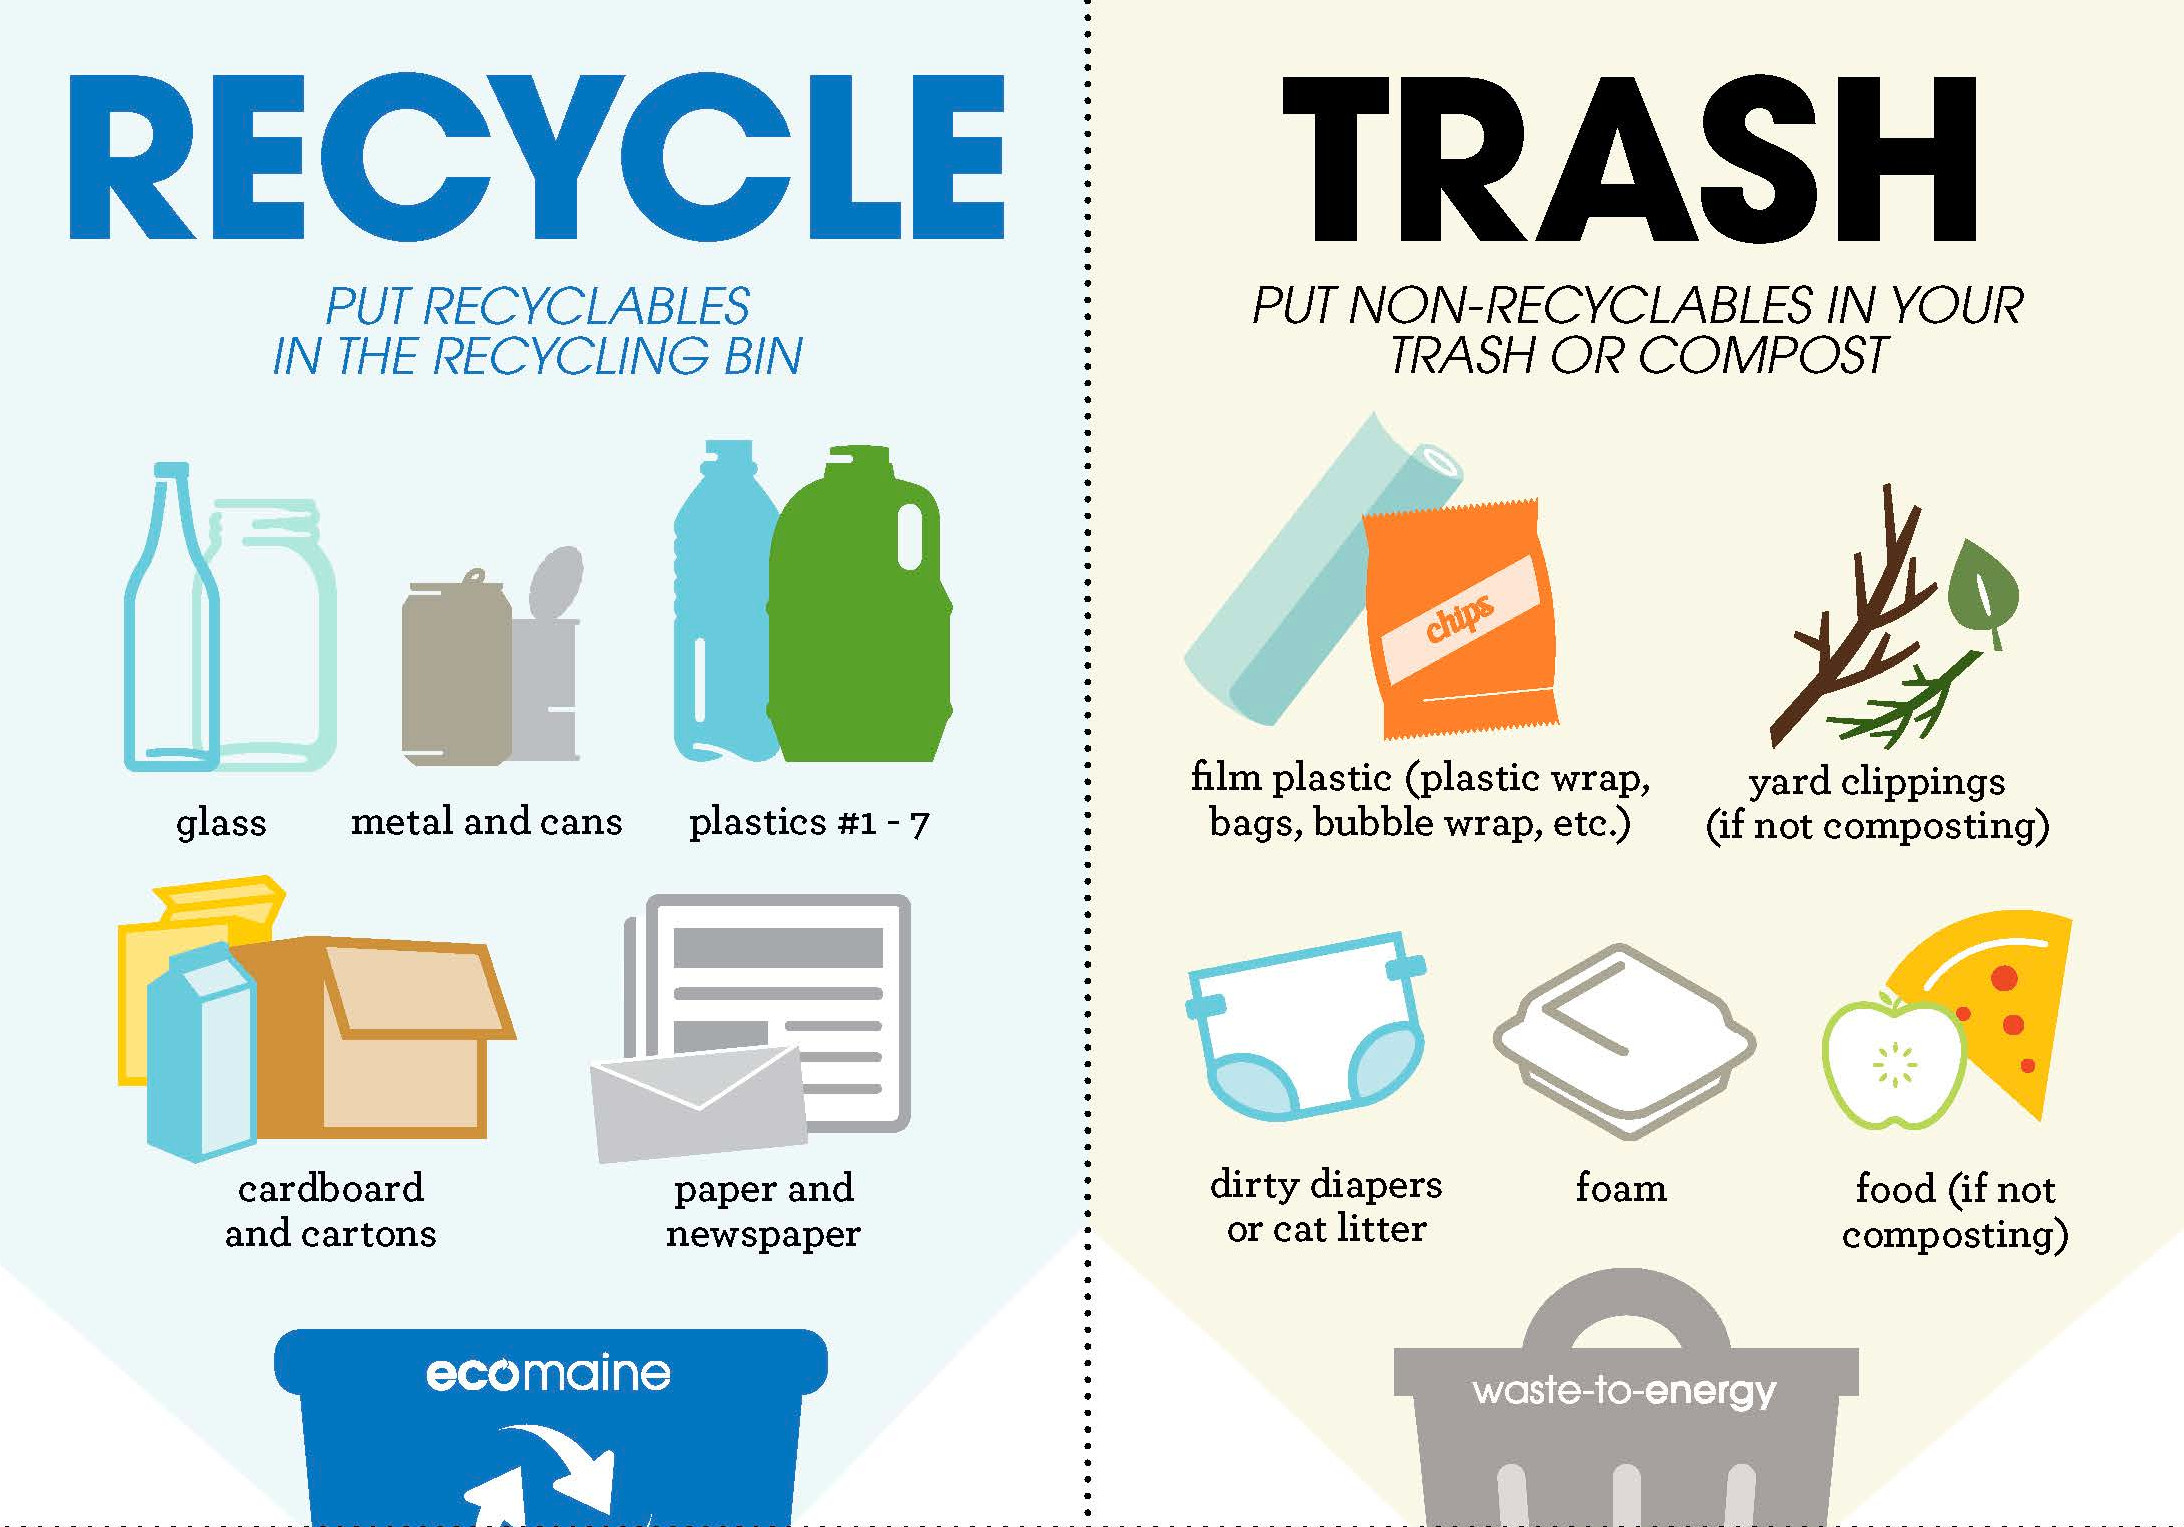 plastic wrap recycling